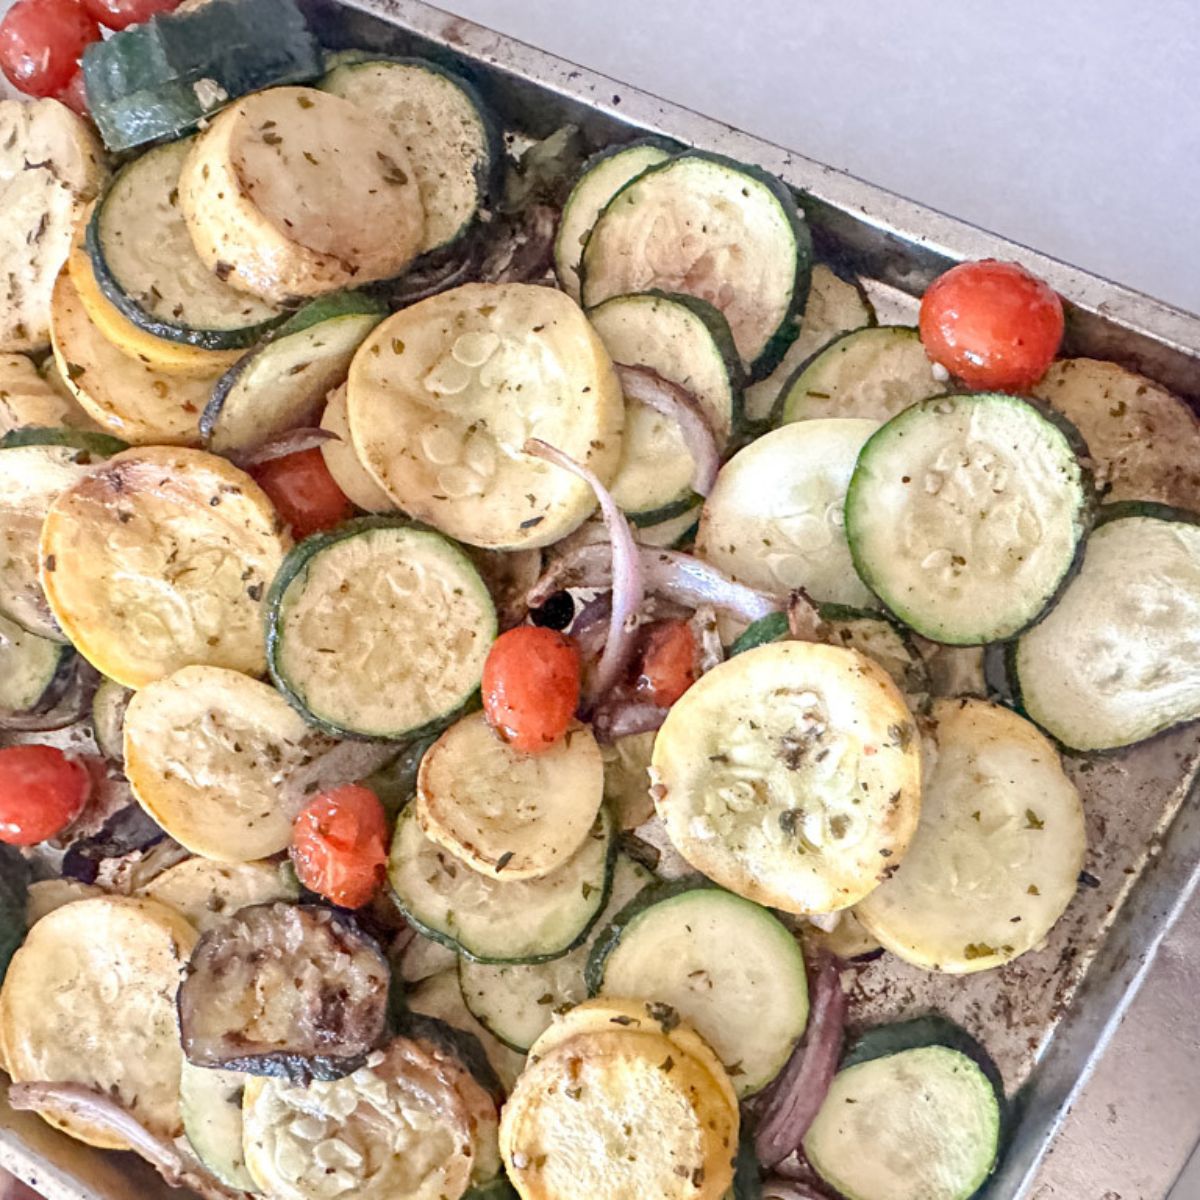 Delicious Grilled Zucchini and Squash